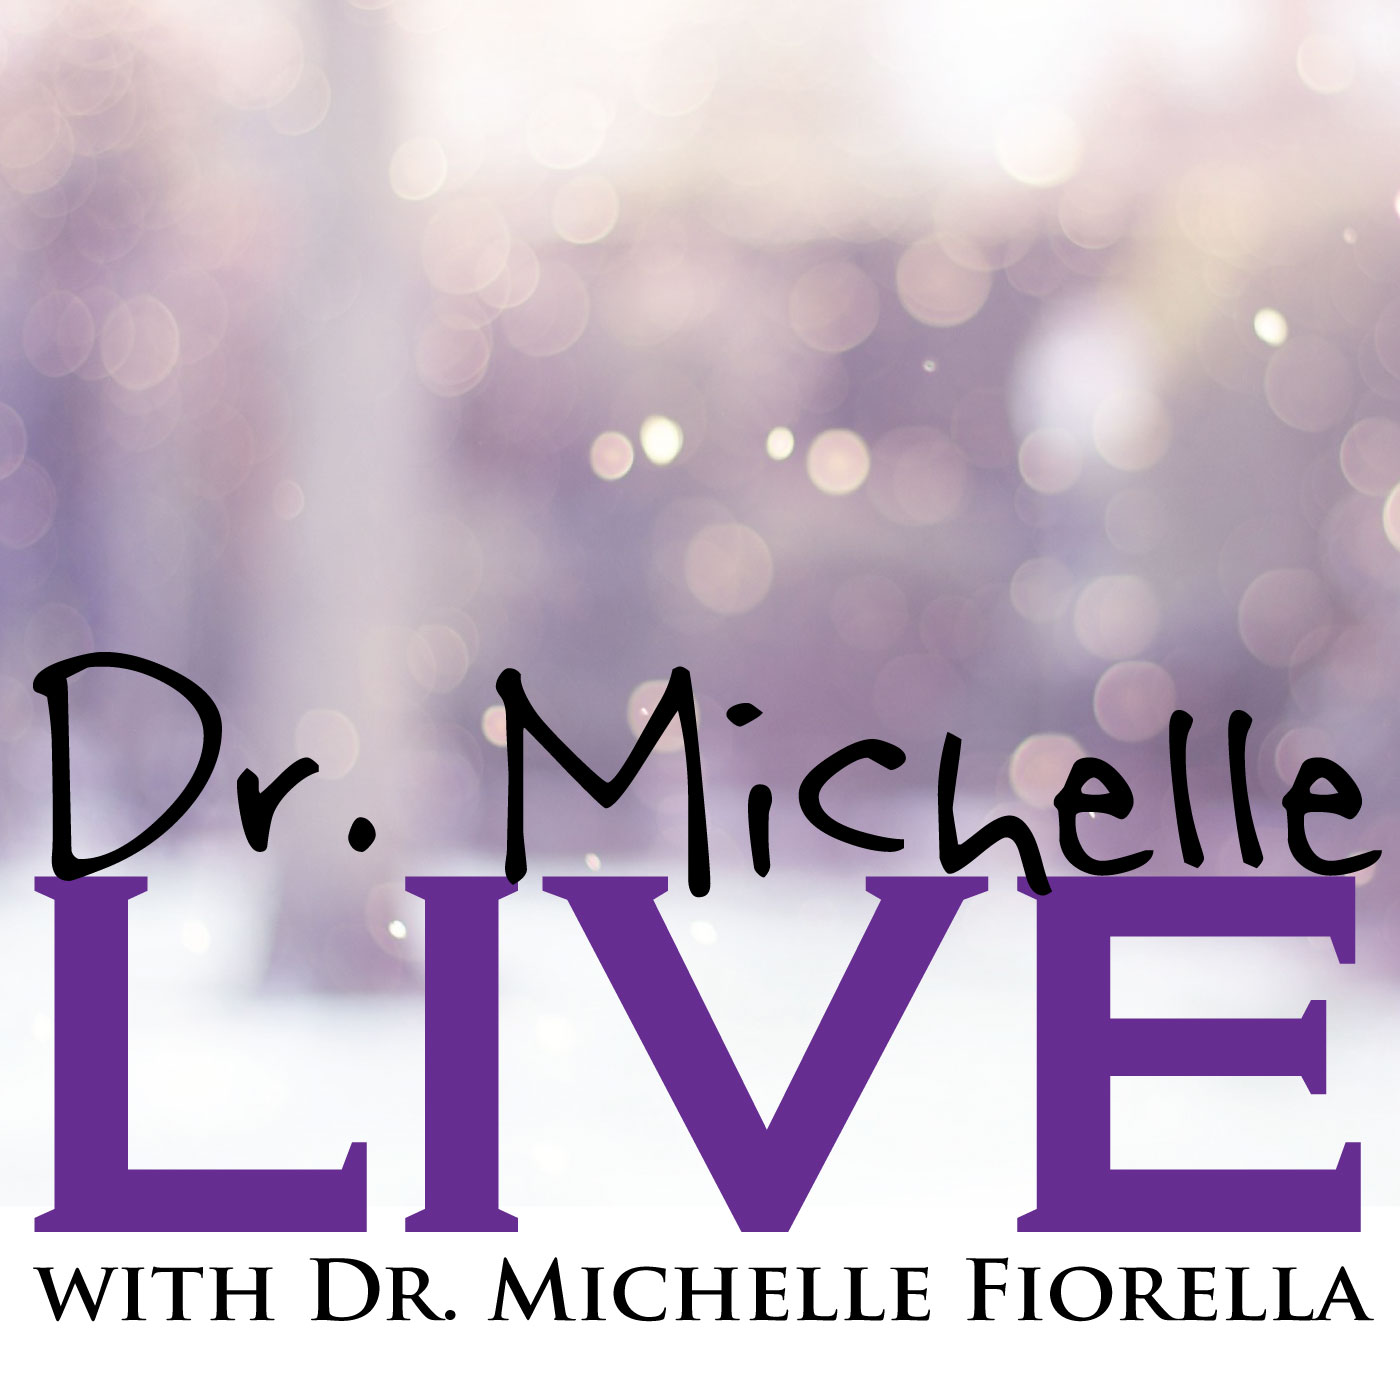 Dr. Michelle Live! 02/16/17 Unhealed? Please Don’t Despair. Healing Is A Process. There is So Much More At Work Than You Can Possibly Imagine.